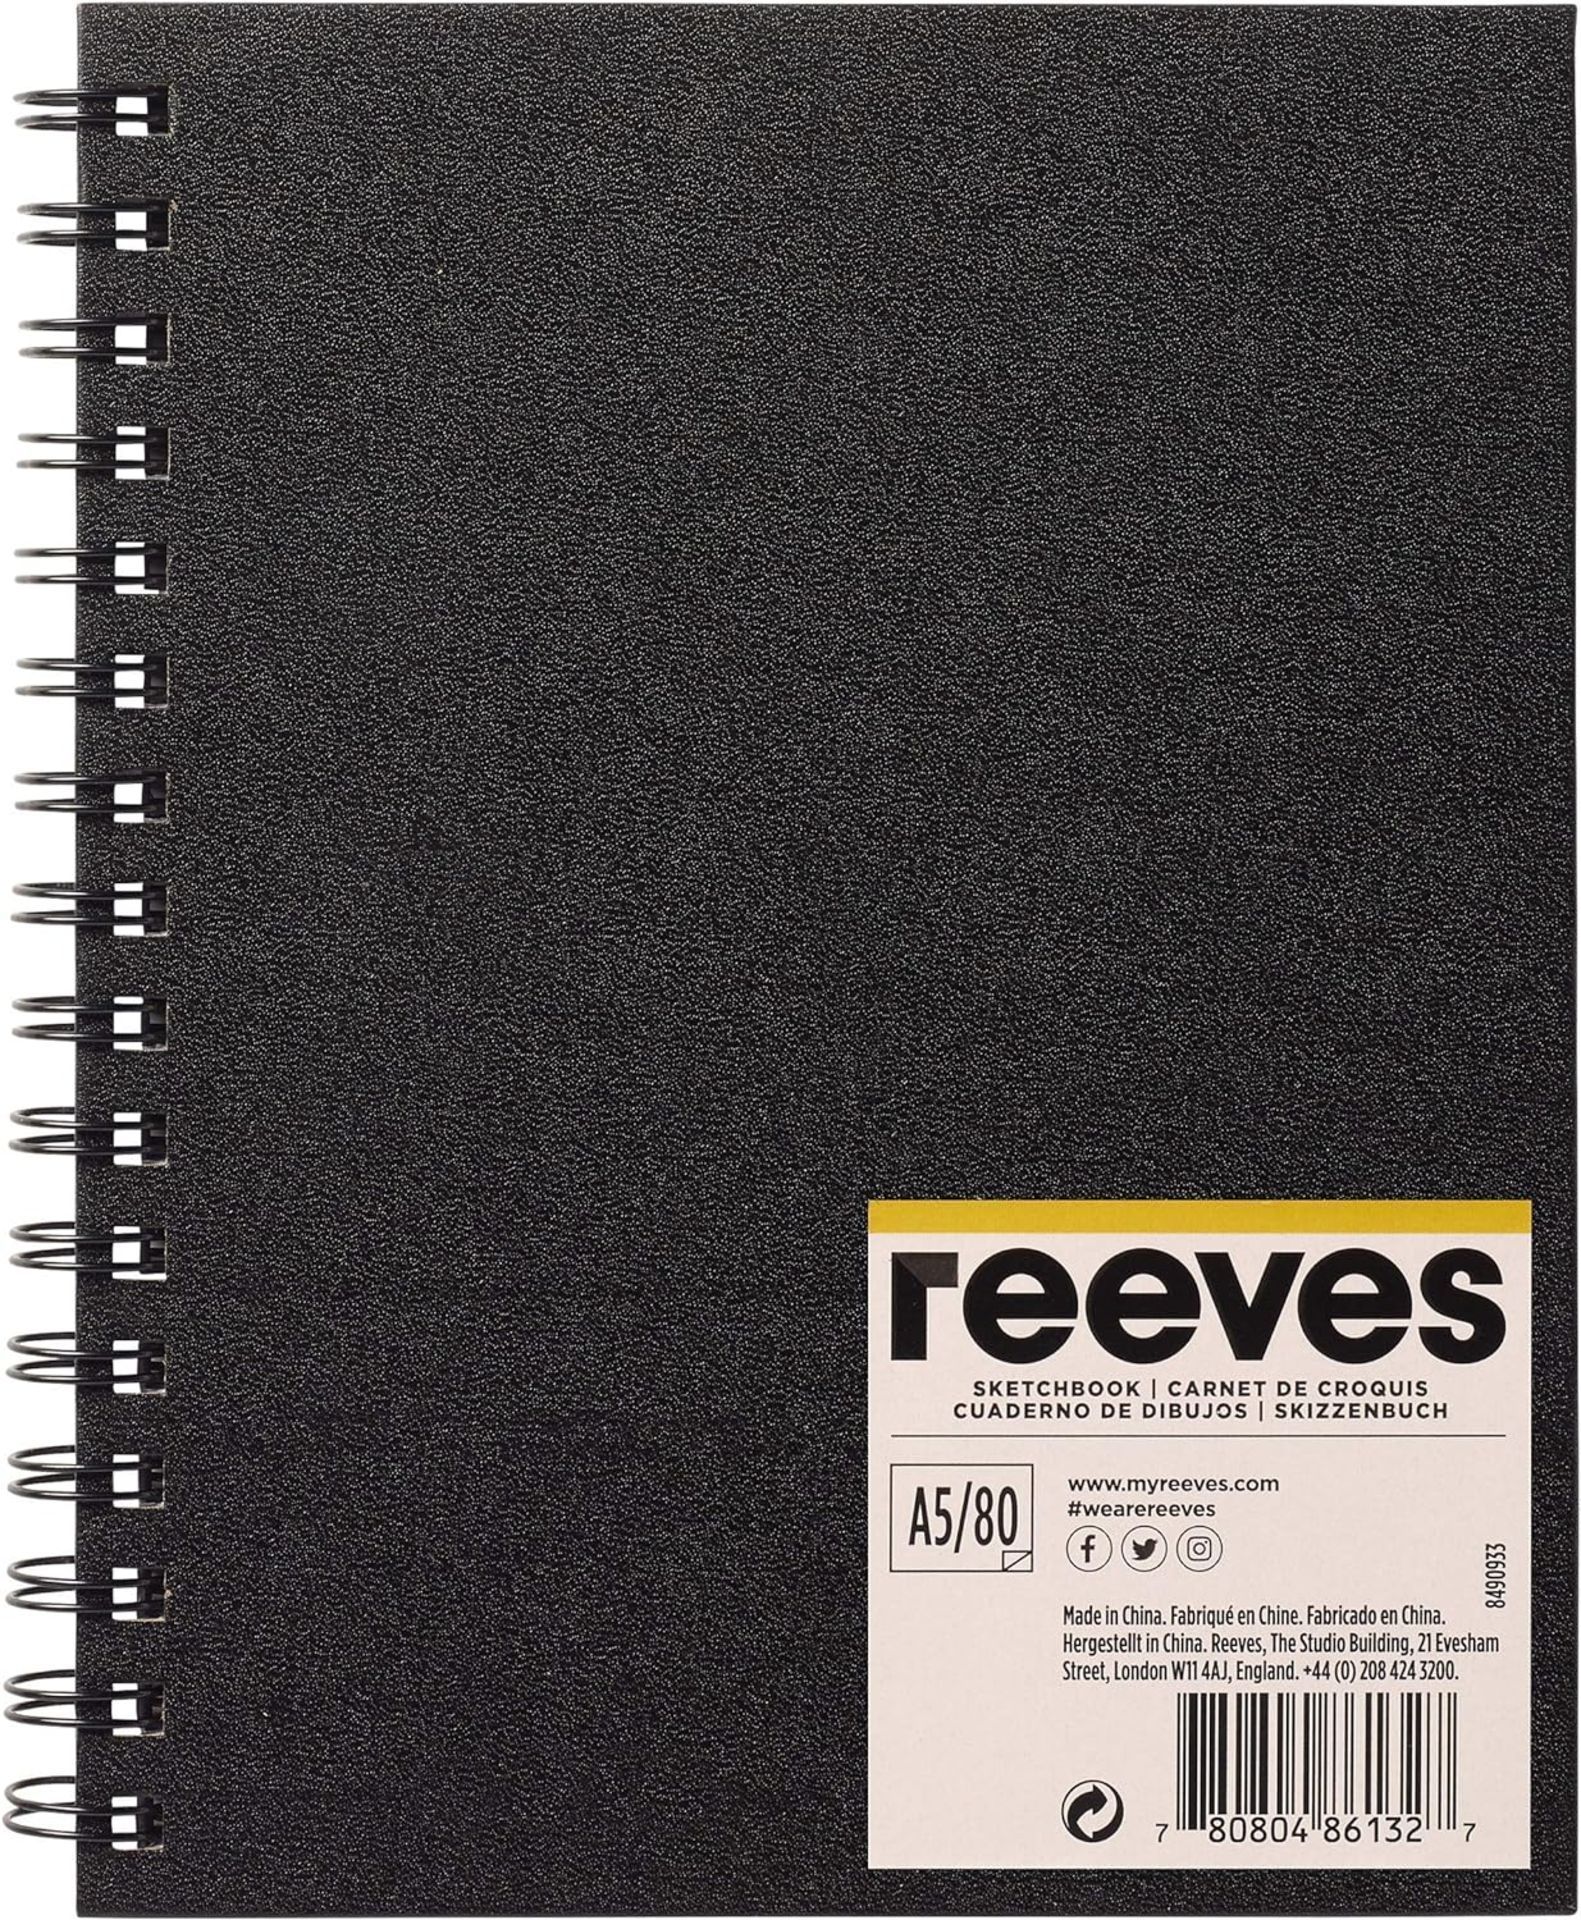 40x BRAND NEW REEVES Hardback Sketchbook A5 Spiral Bound with 80 Pages. RRP £6.29 EACH. Acid-Free